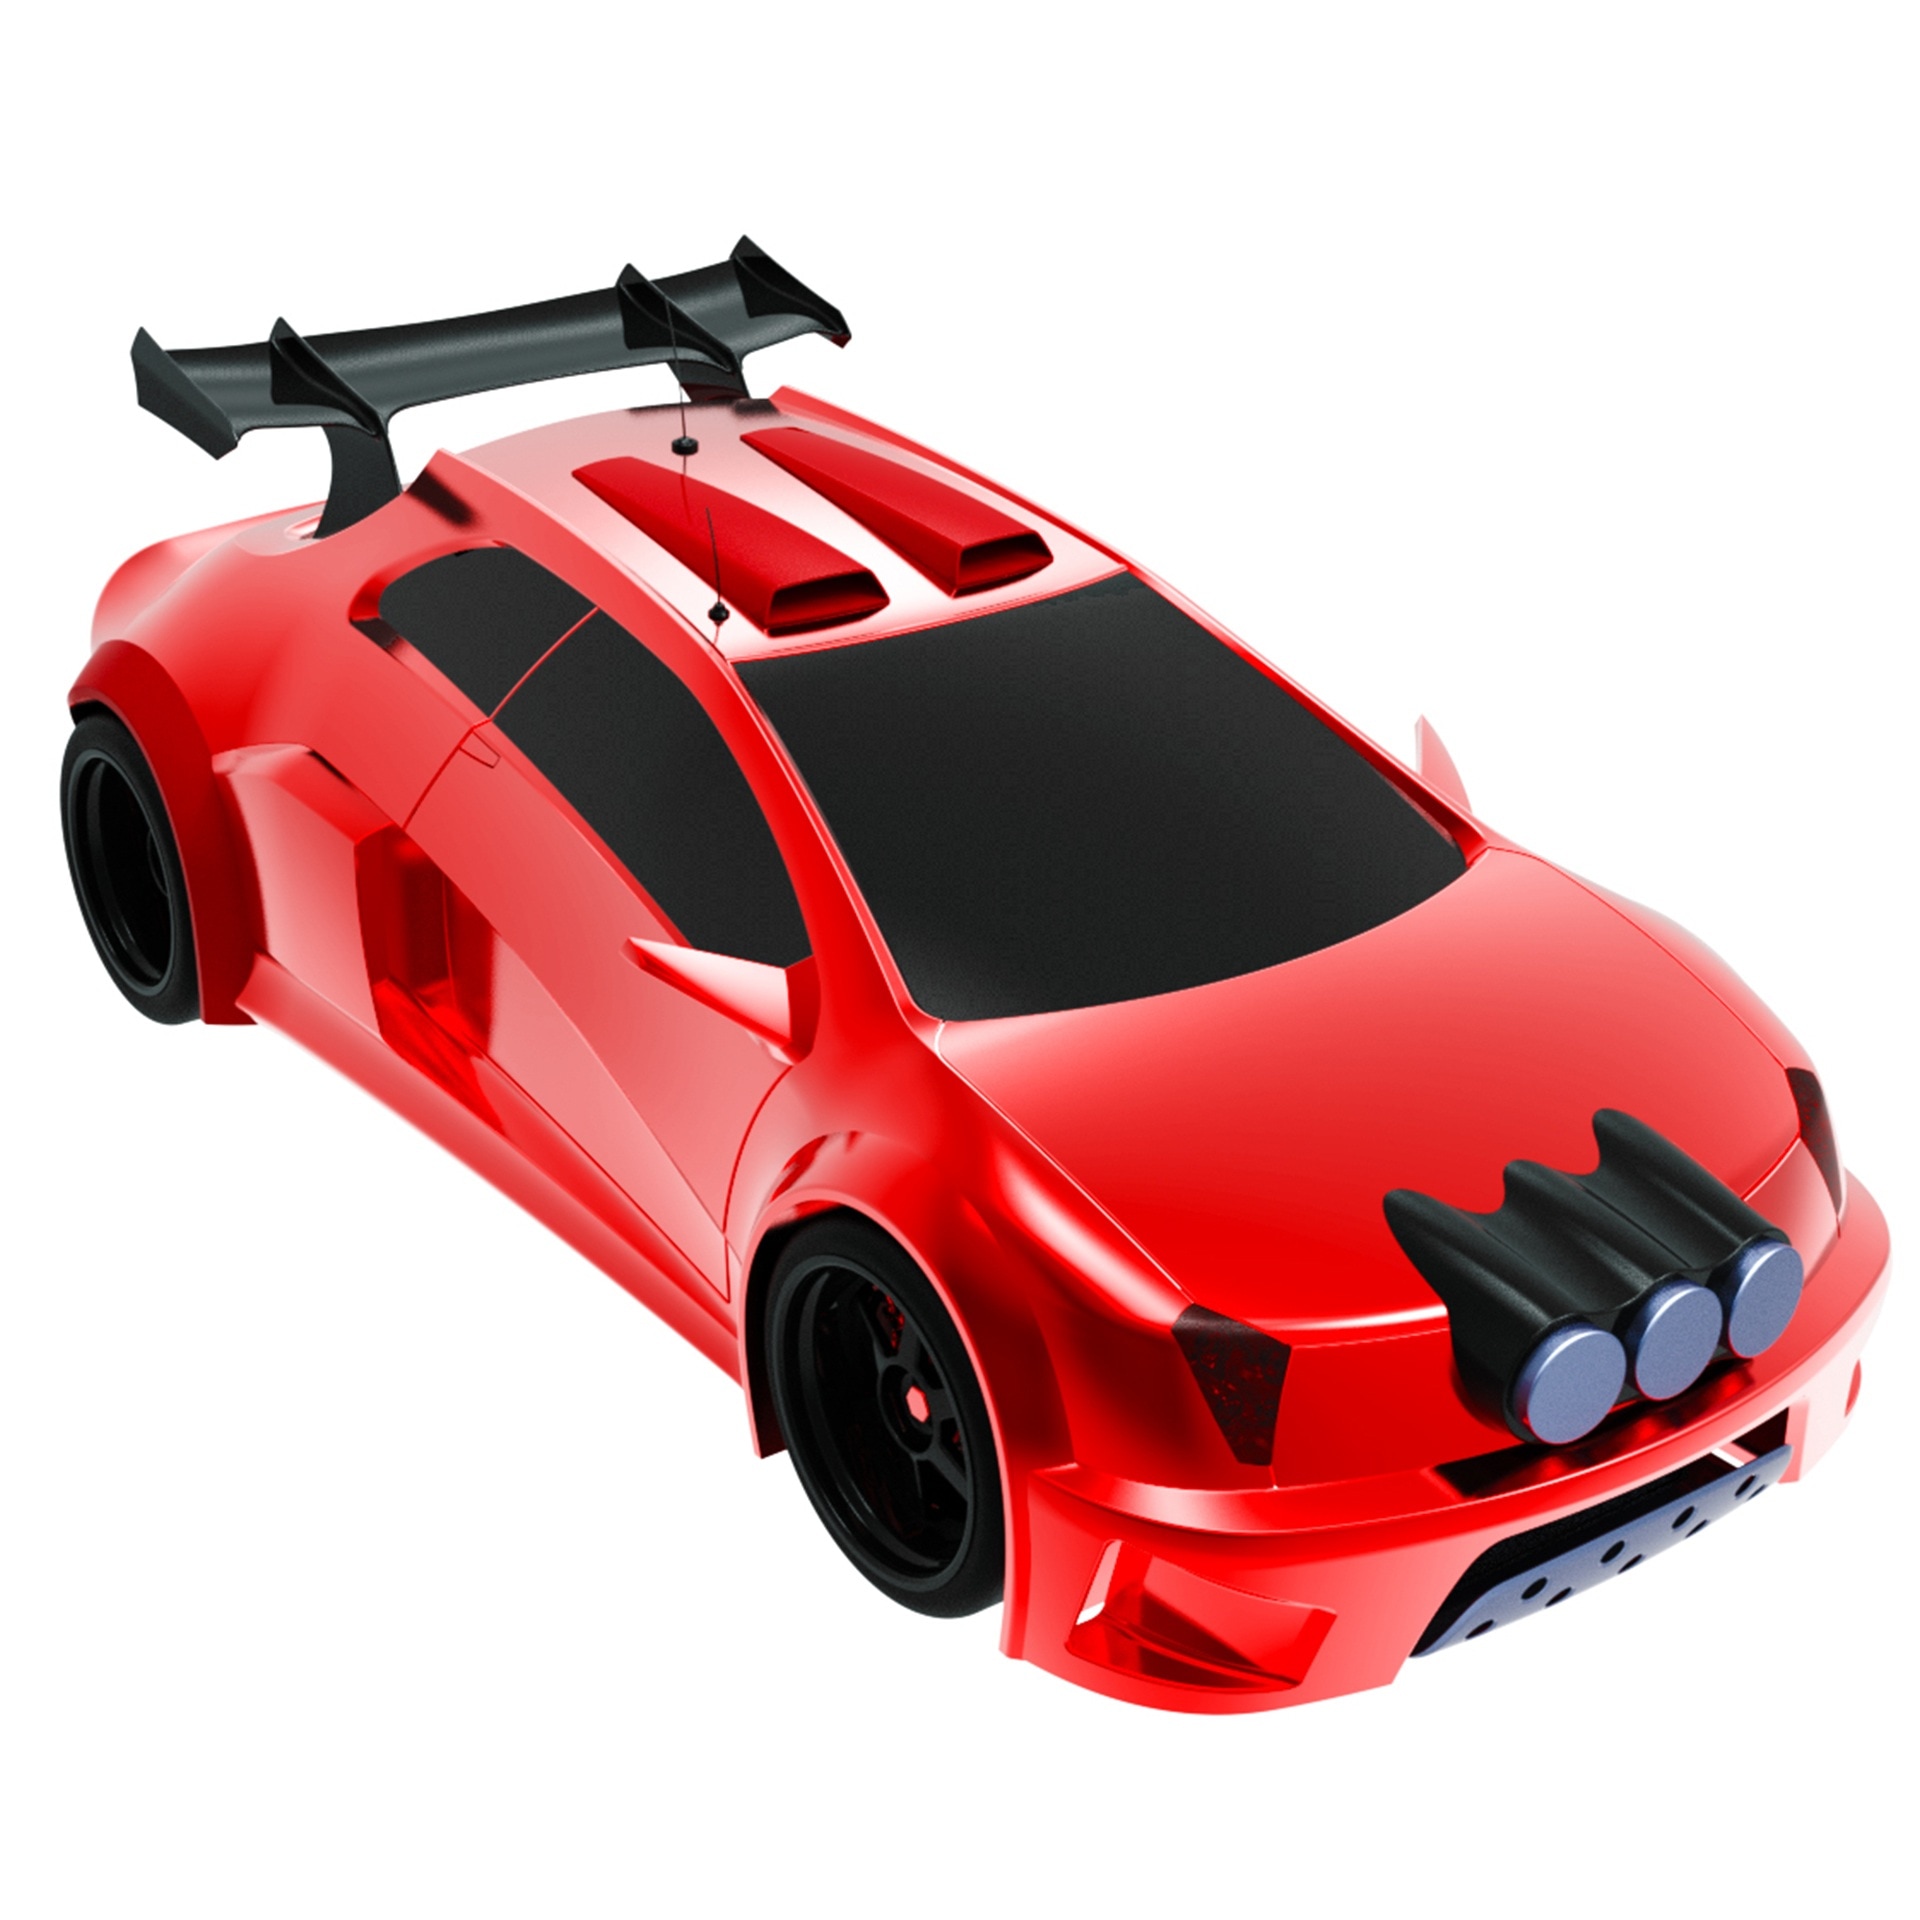 red and black racing car toy